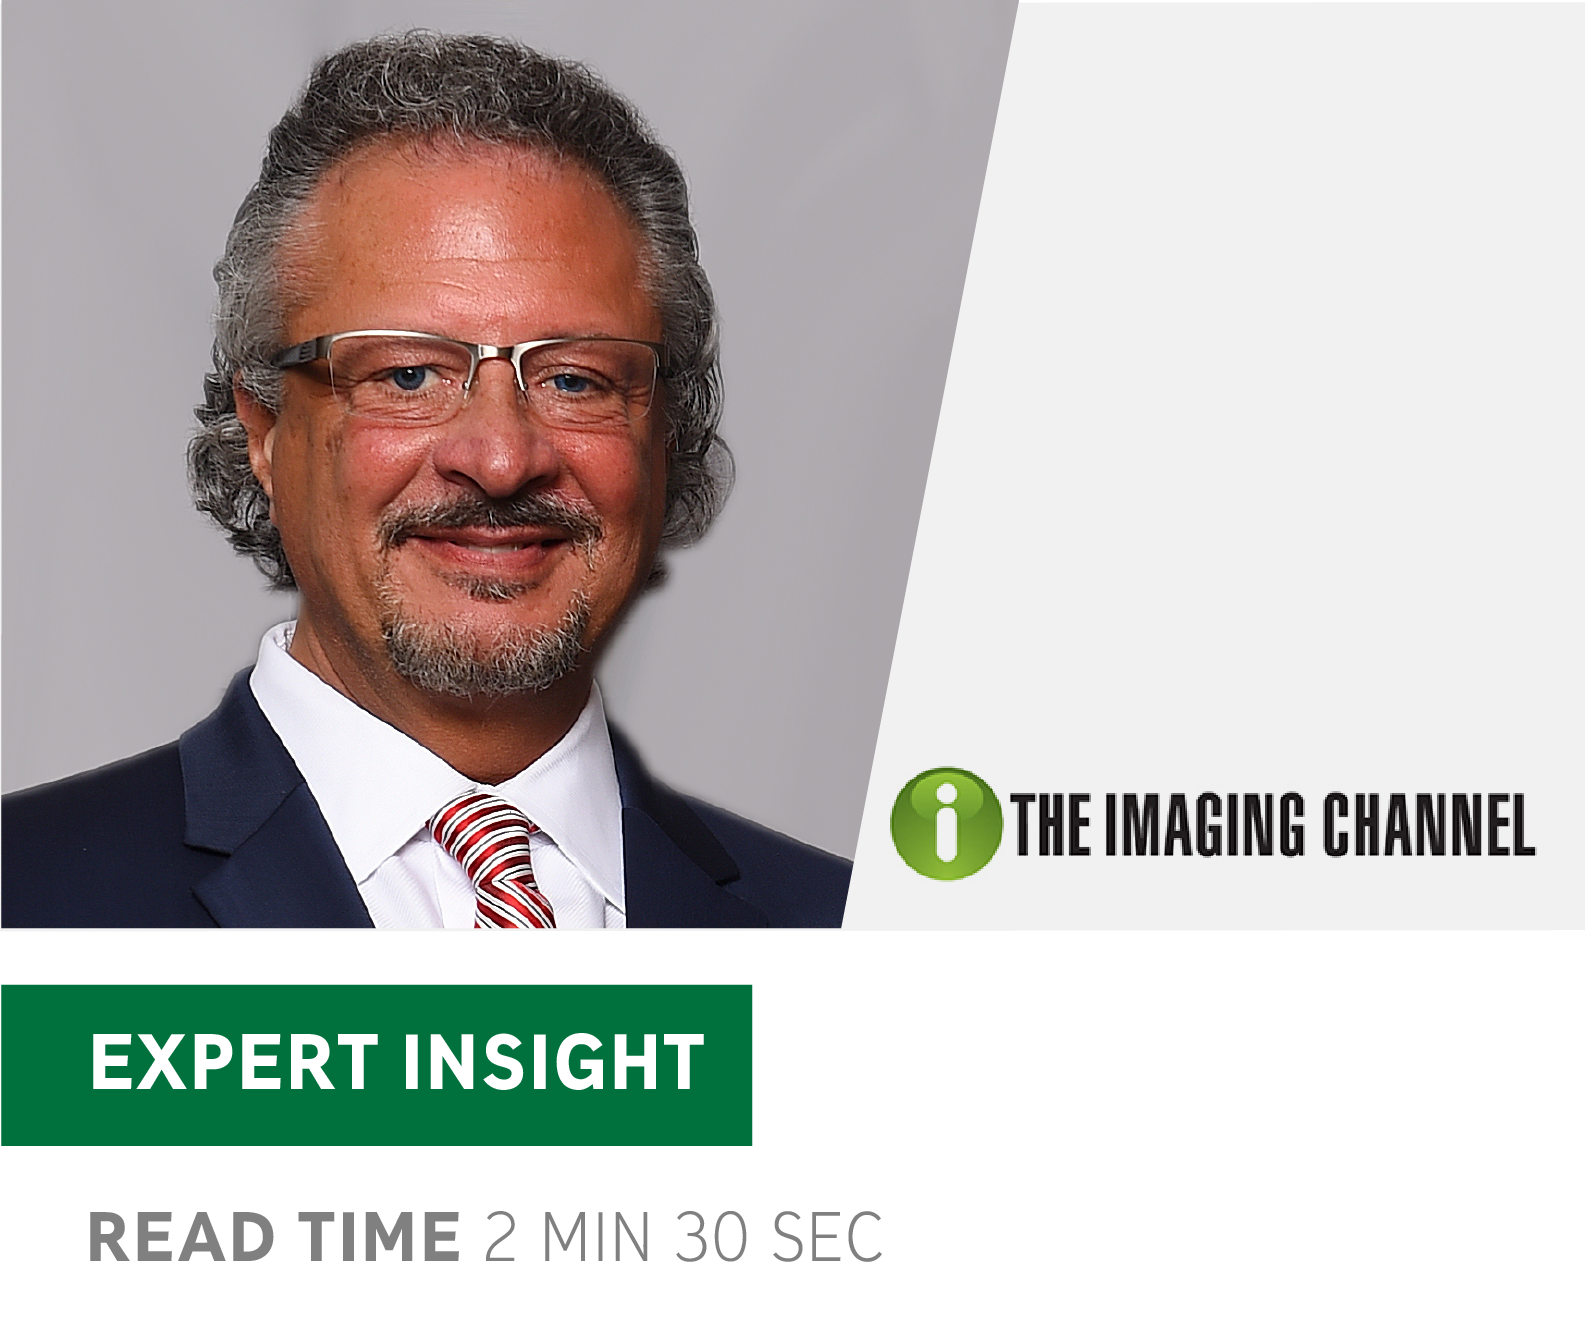 The Imaging Channel Expert Insight - Nick Capparelli